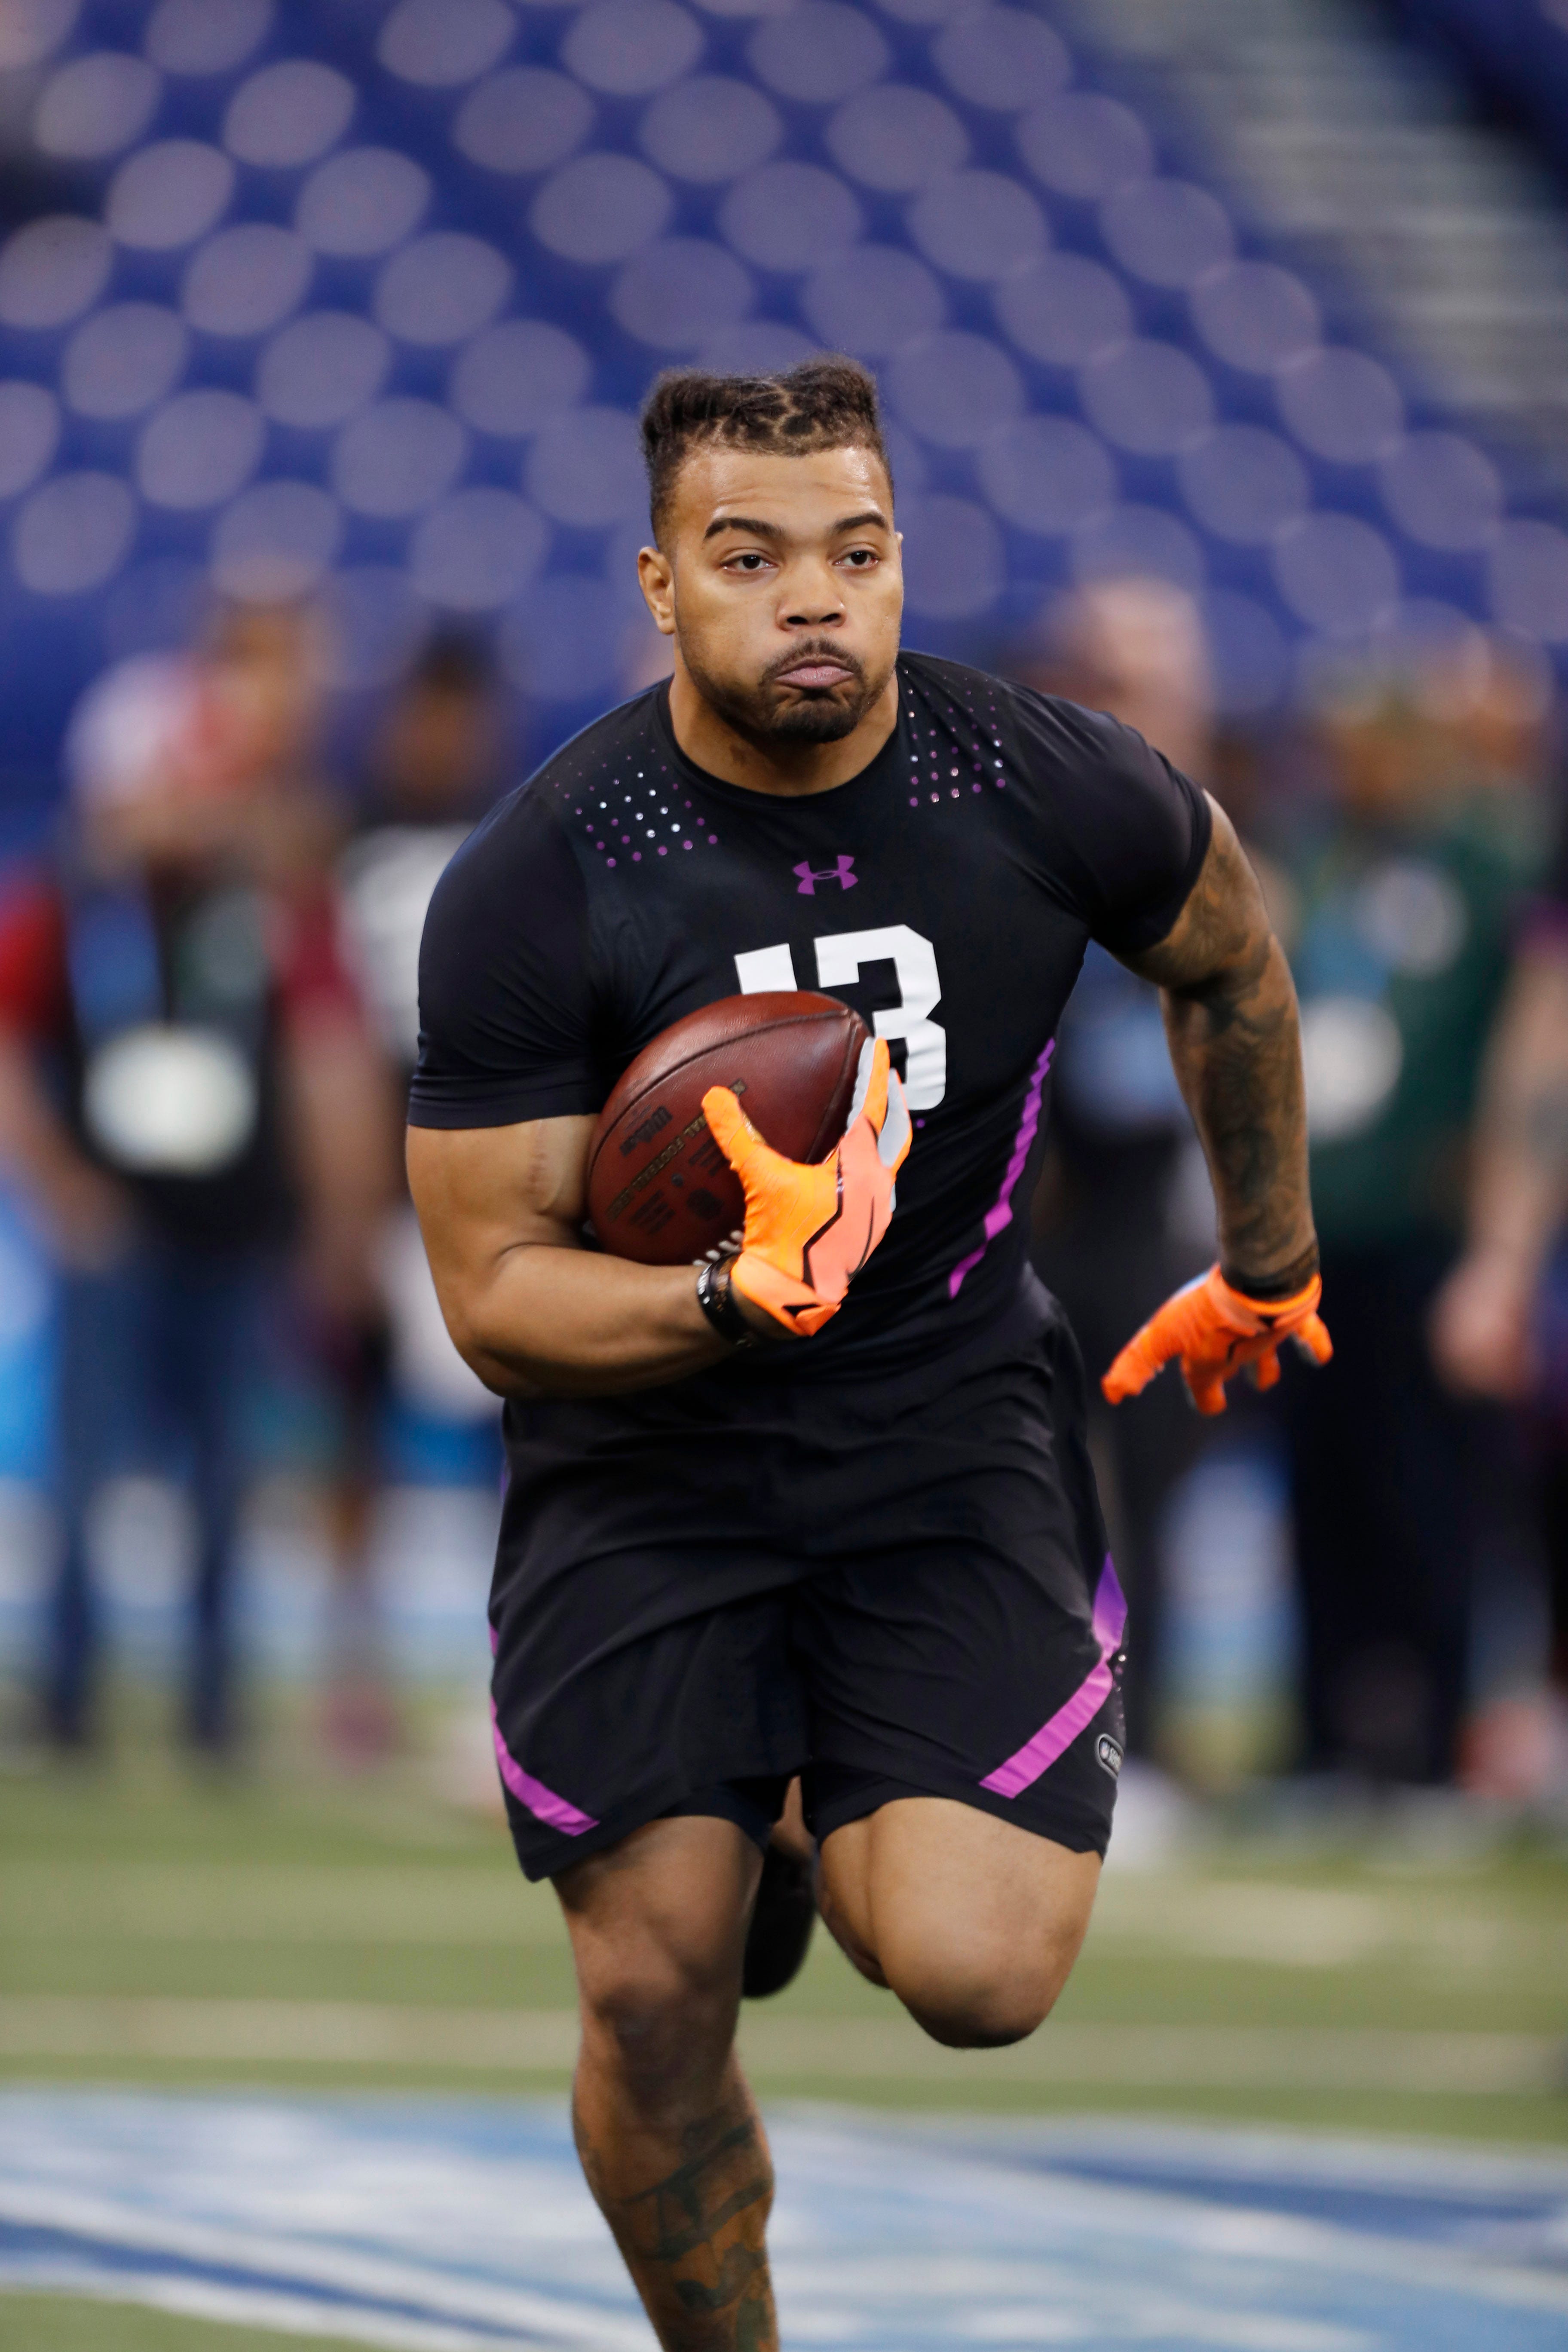 NFLPA leader: Team that asked prospect about sexuality should be banned from NFL combine